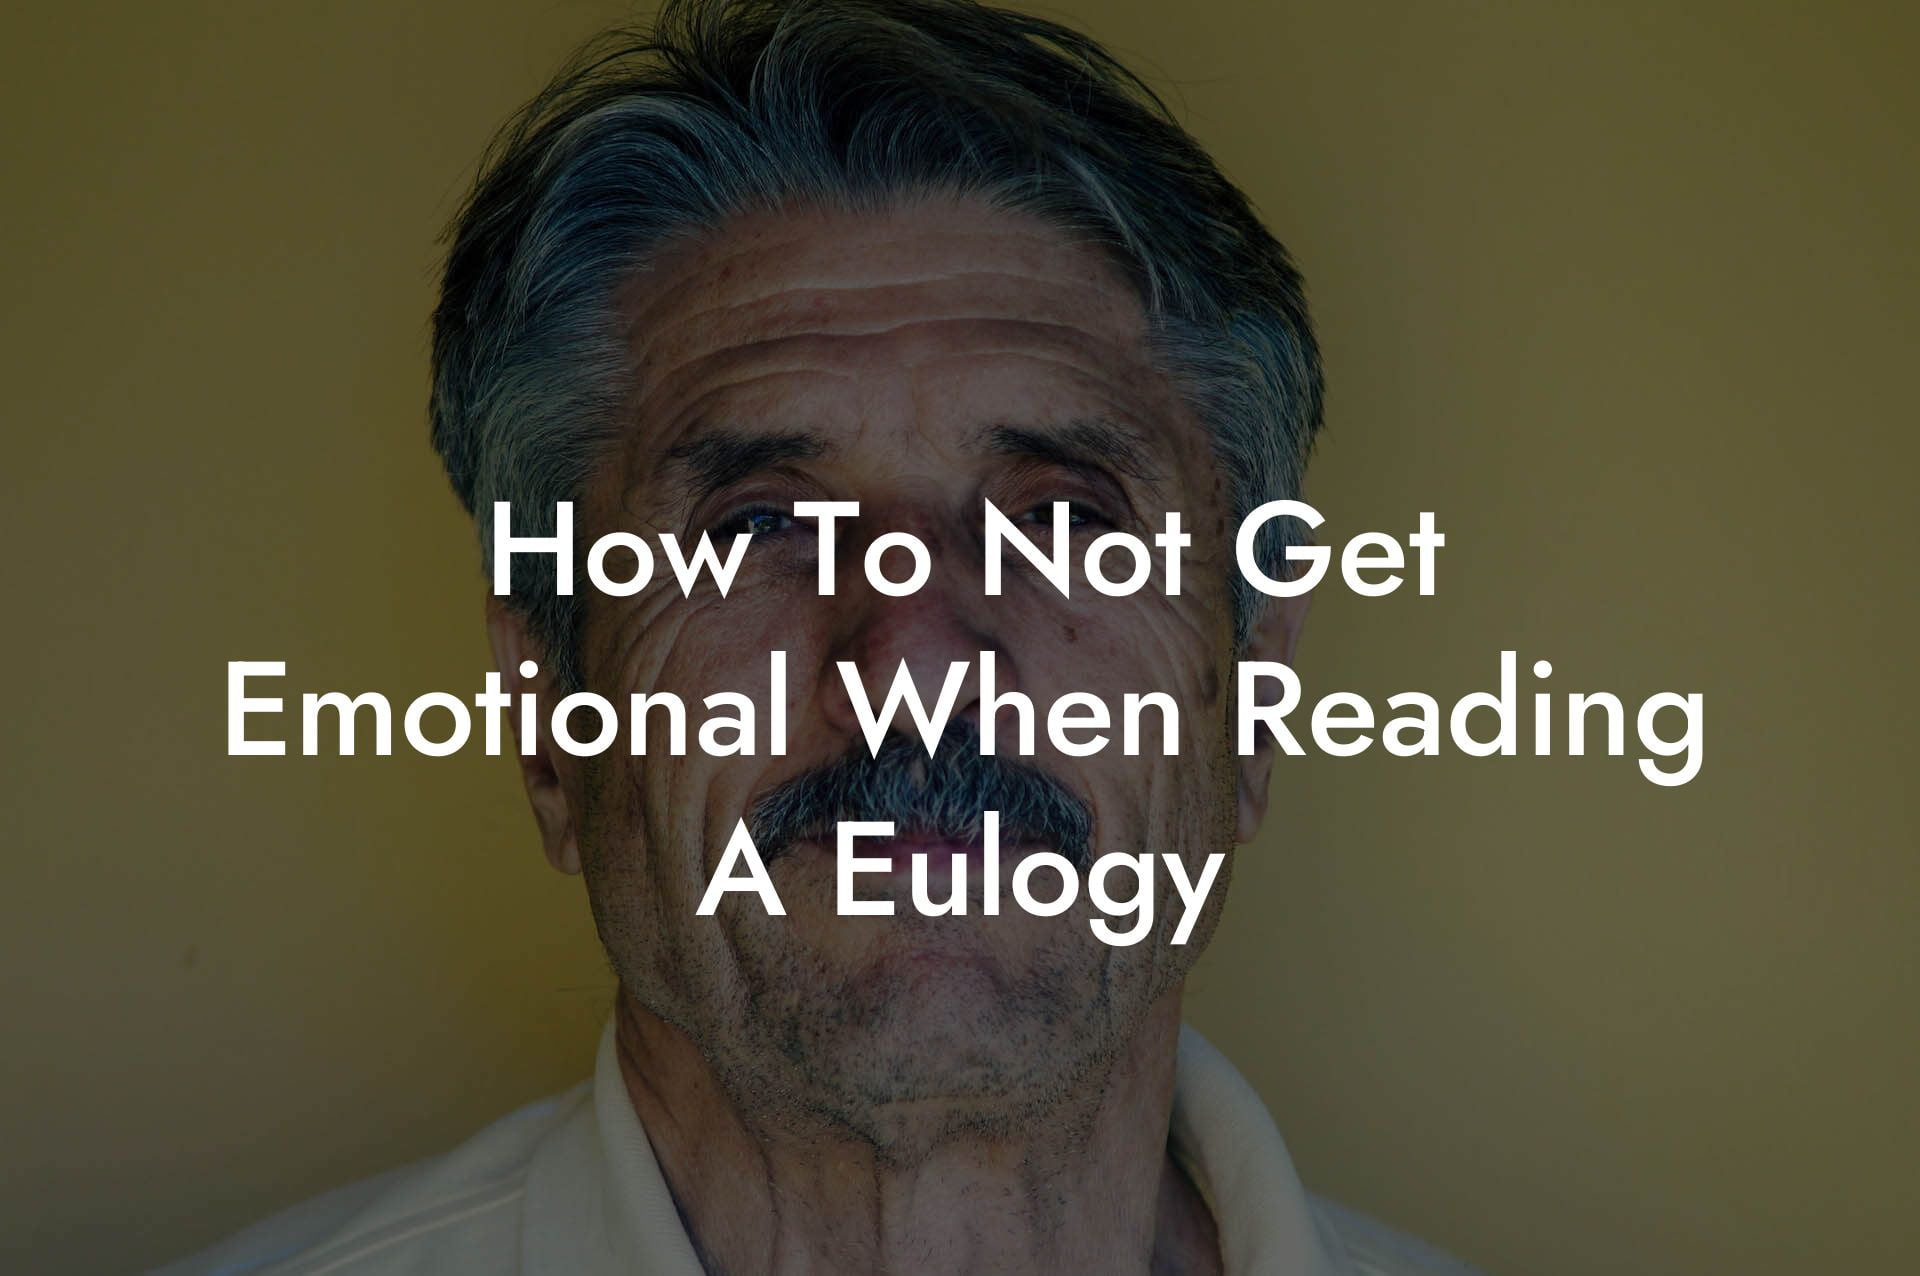 How To Not Get Emotional When Reading A Eulogy